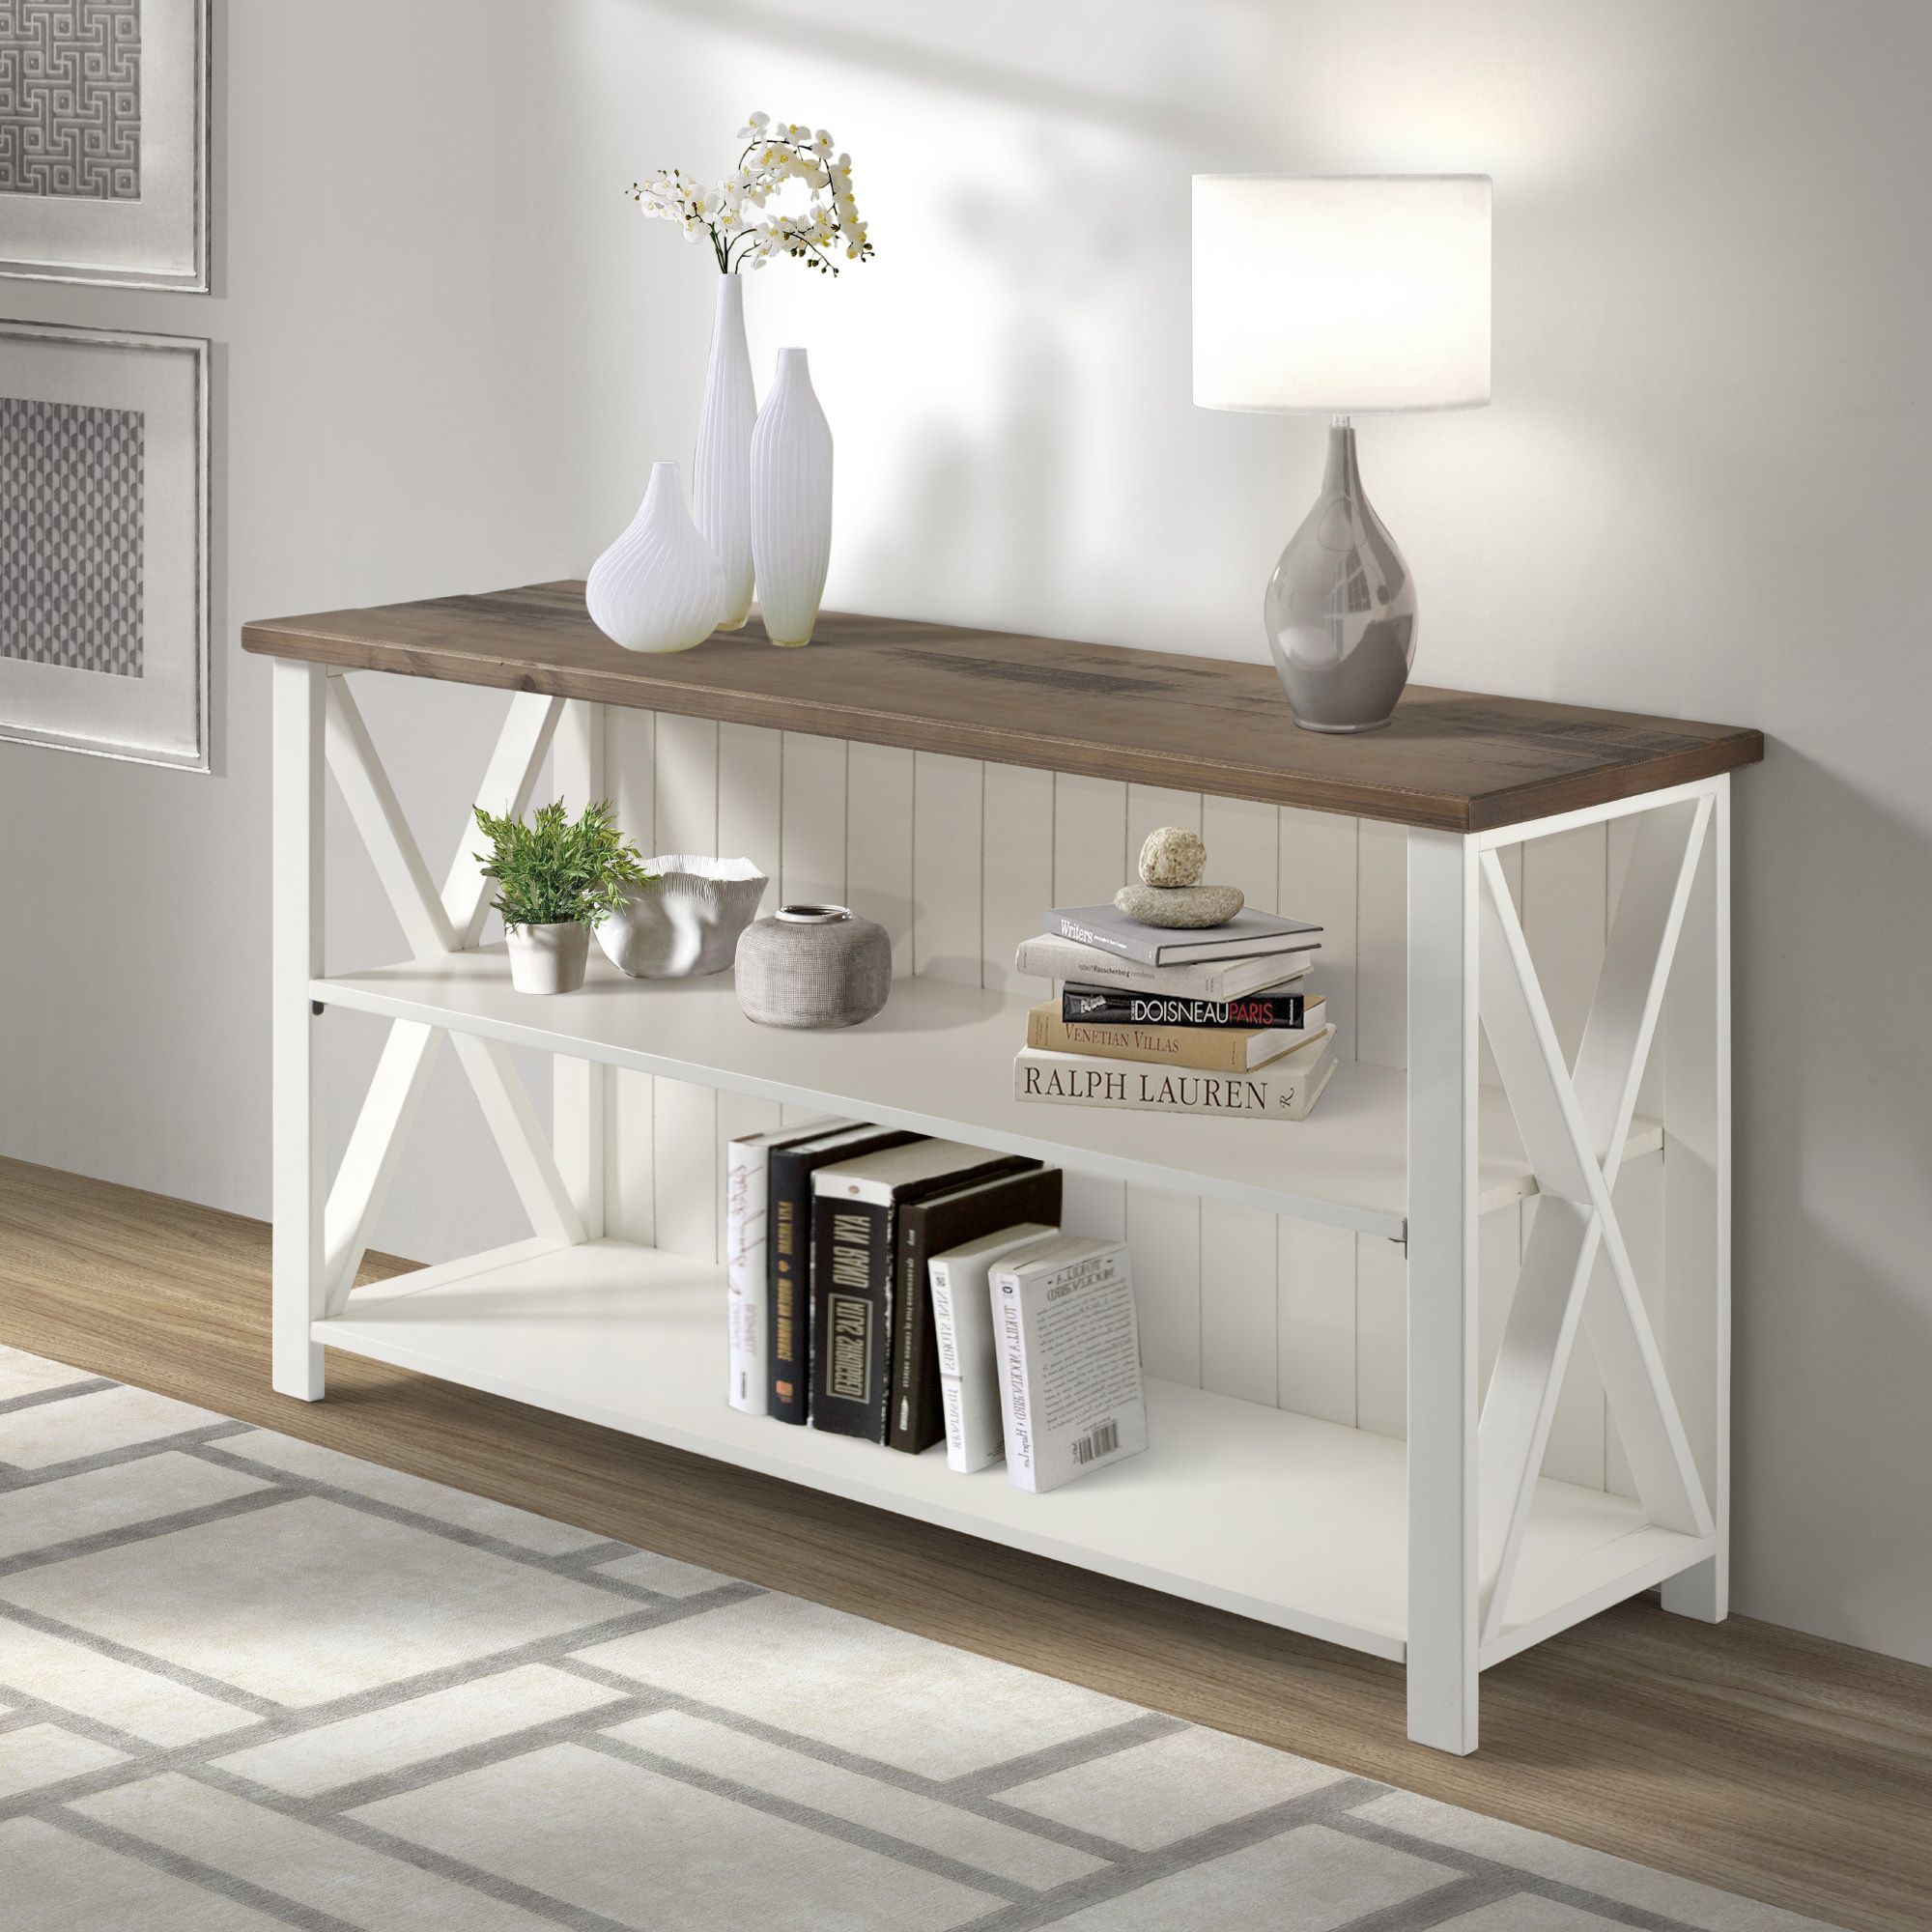 Woven Paths Solid Wood Storage Console Table, White Pertaining To Woven Paths Barn Door Tv Stands In Multiple Finishes (Photo 8 of 15)